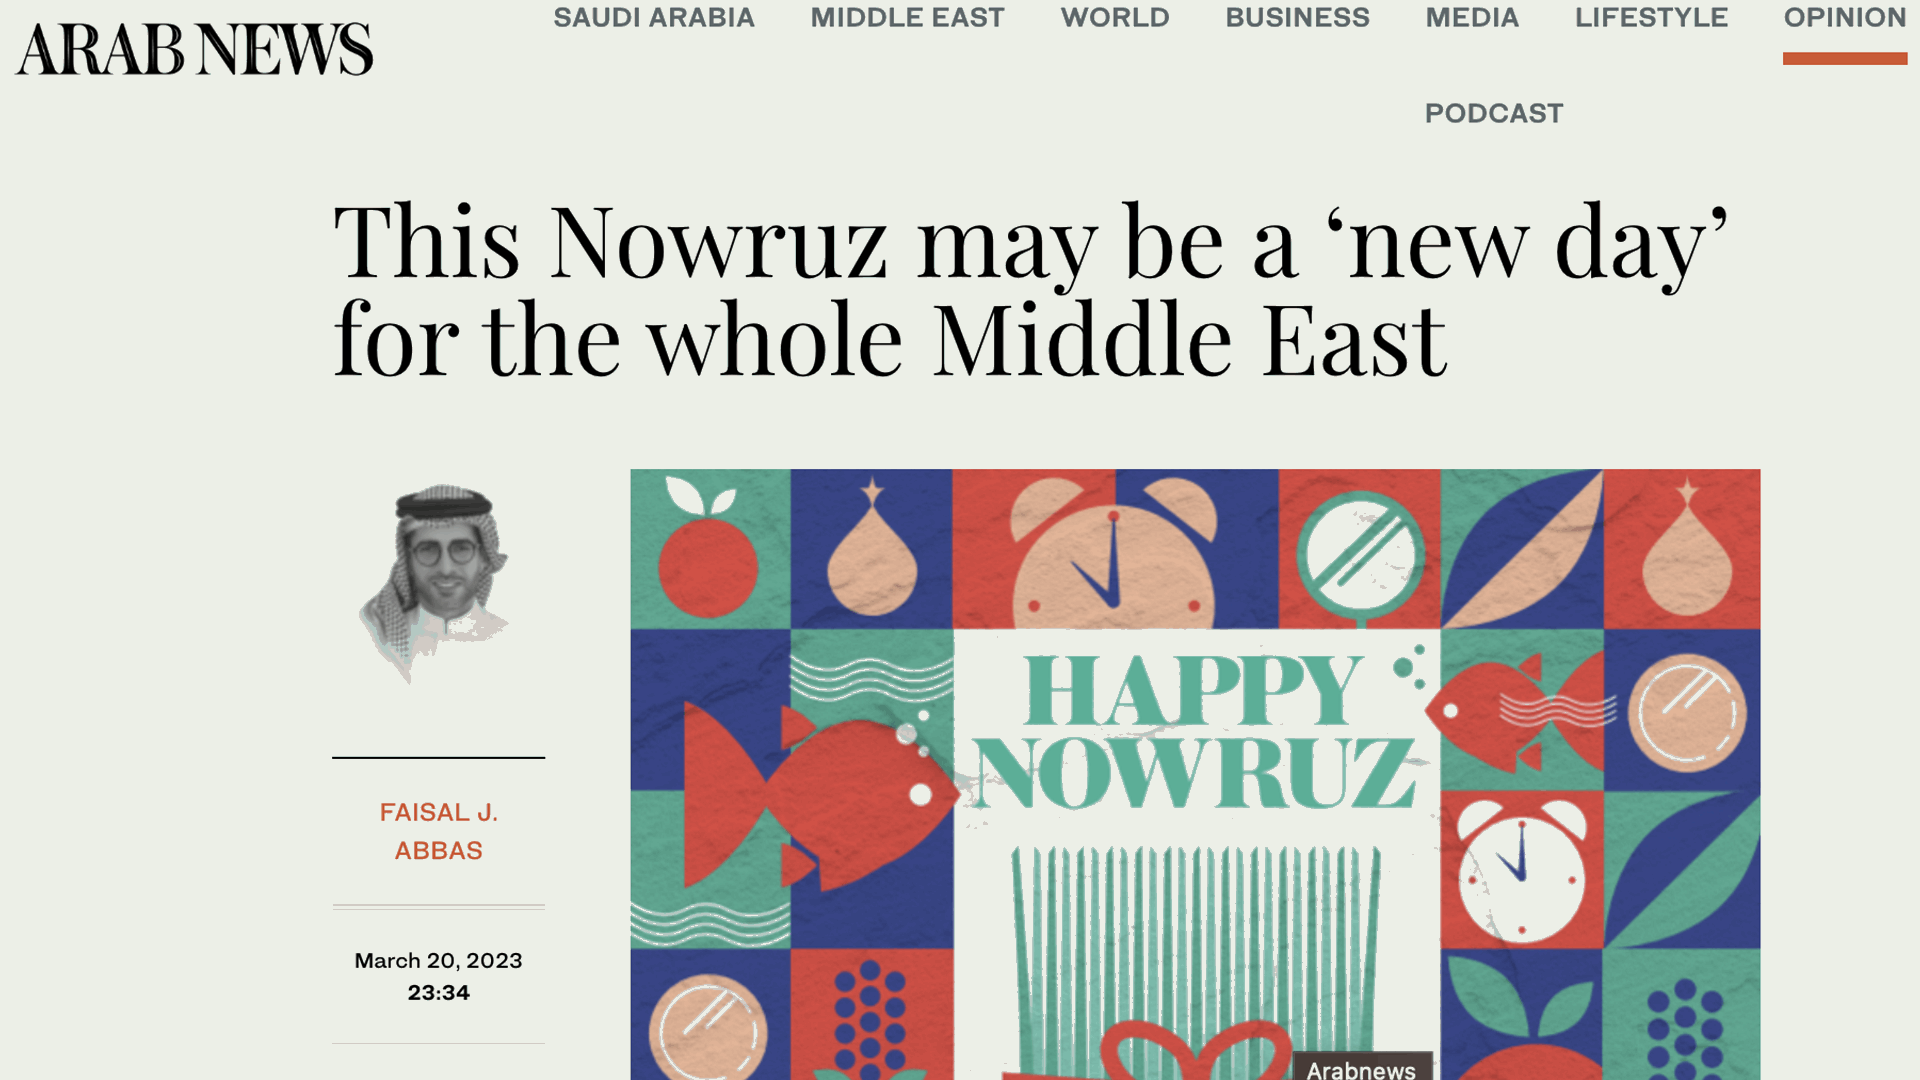 Arab News joins the Nowruz celebrations, heralding a new era for Middle Eastern ties